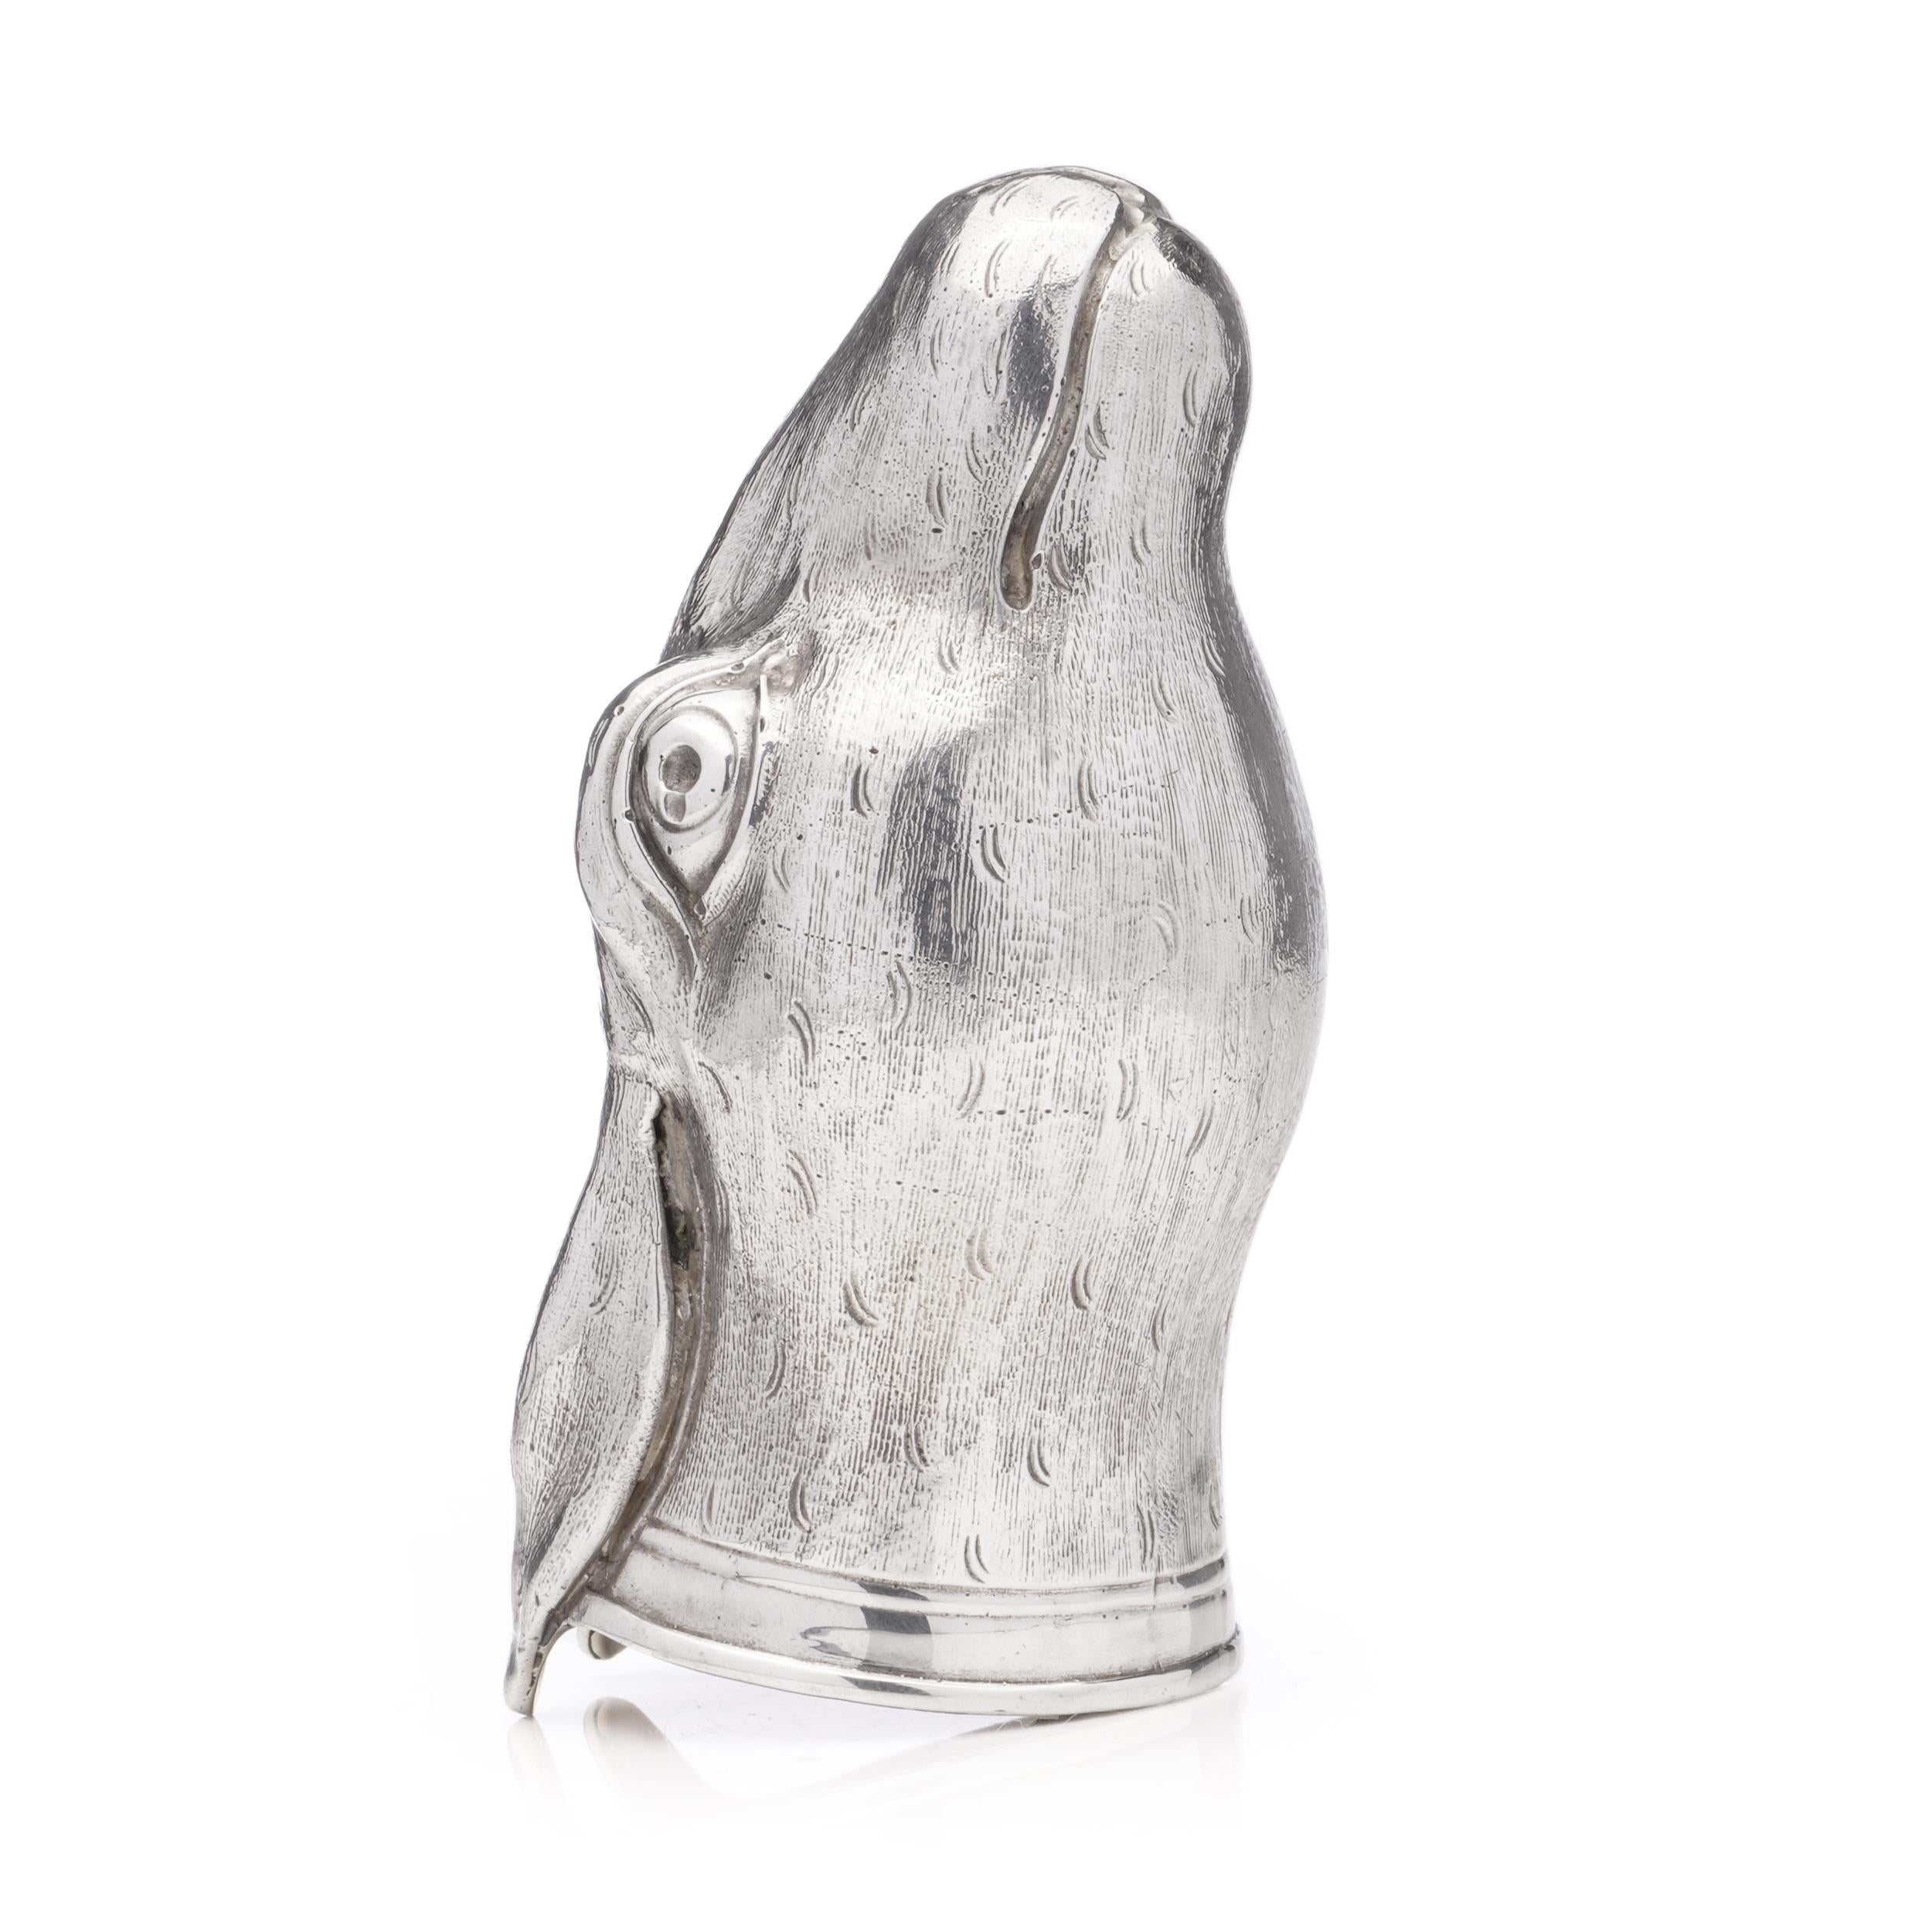 Exceptional Modern Sterling Silver Stirrup Cup Shaped as a Rabbit For Sale 2